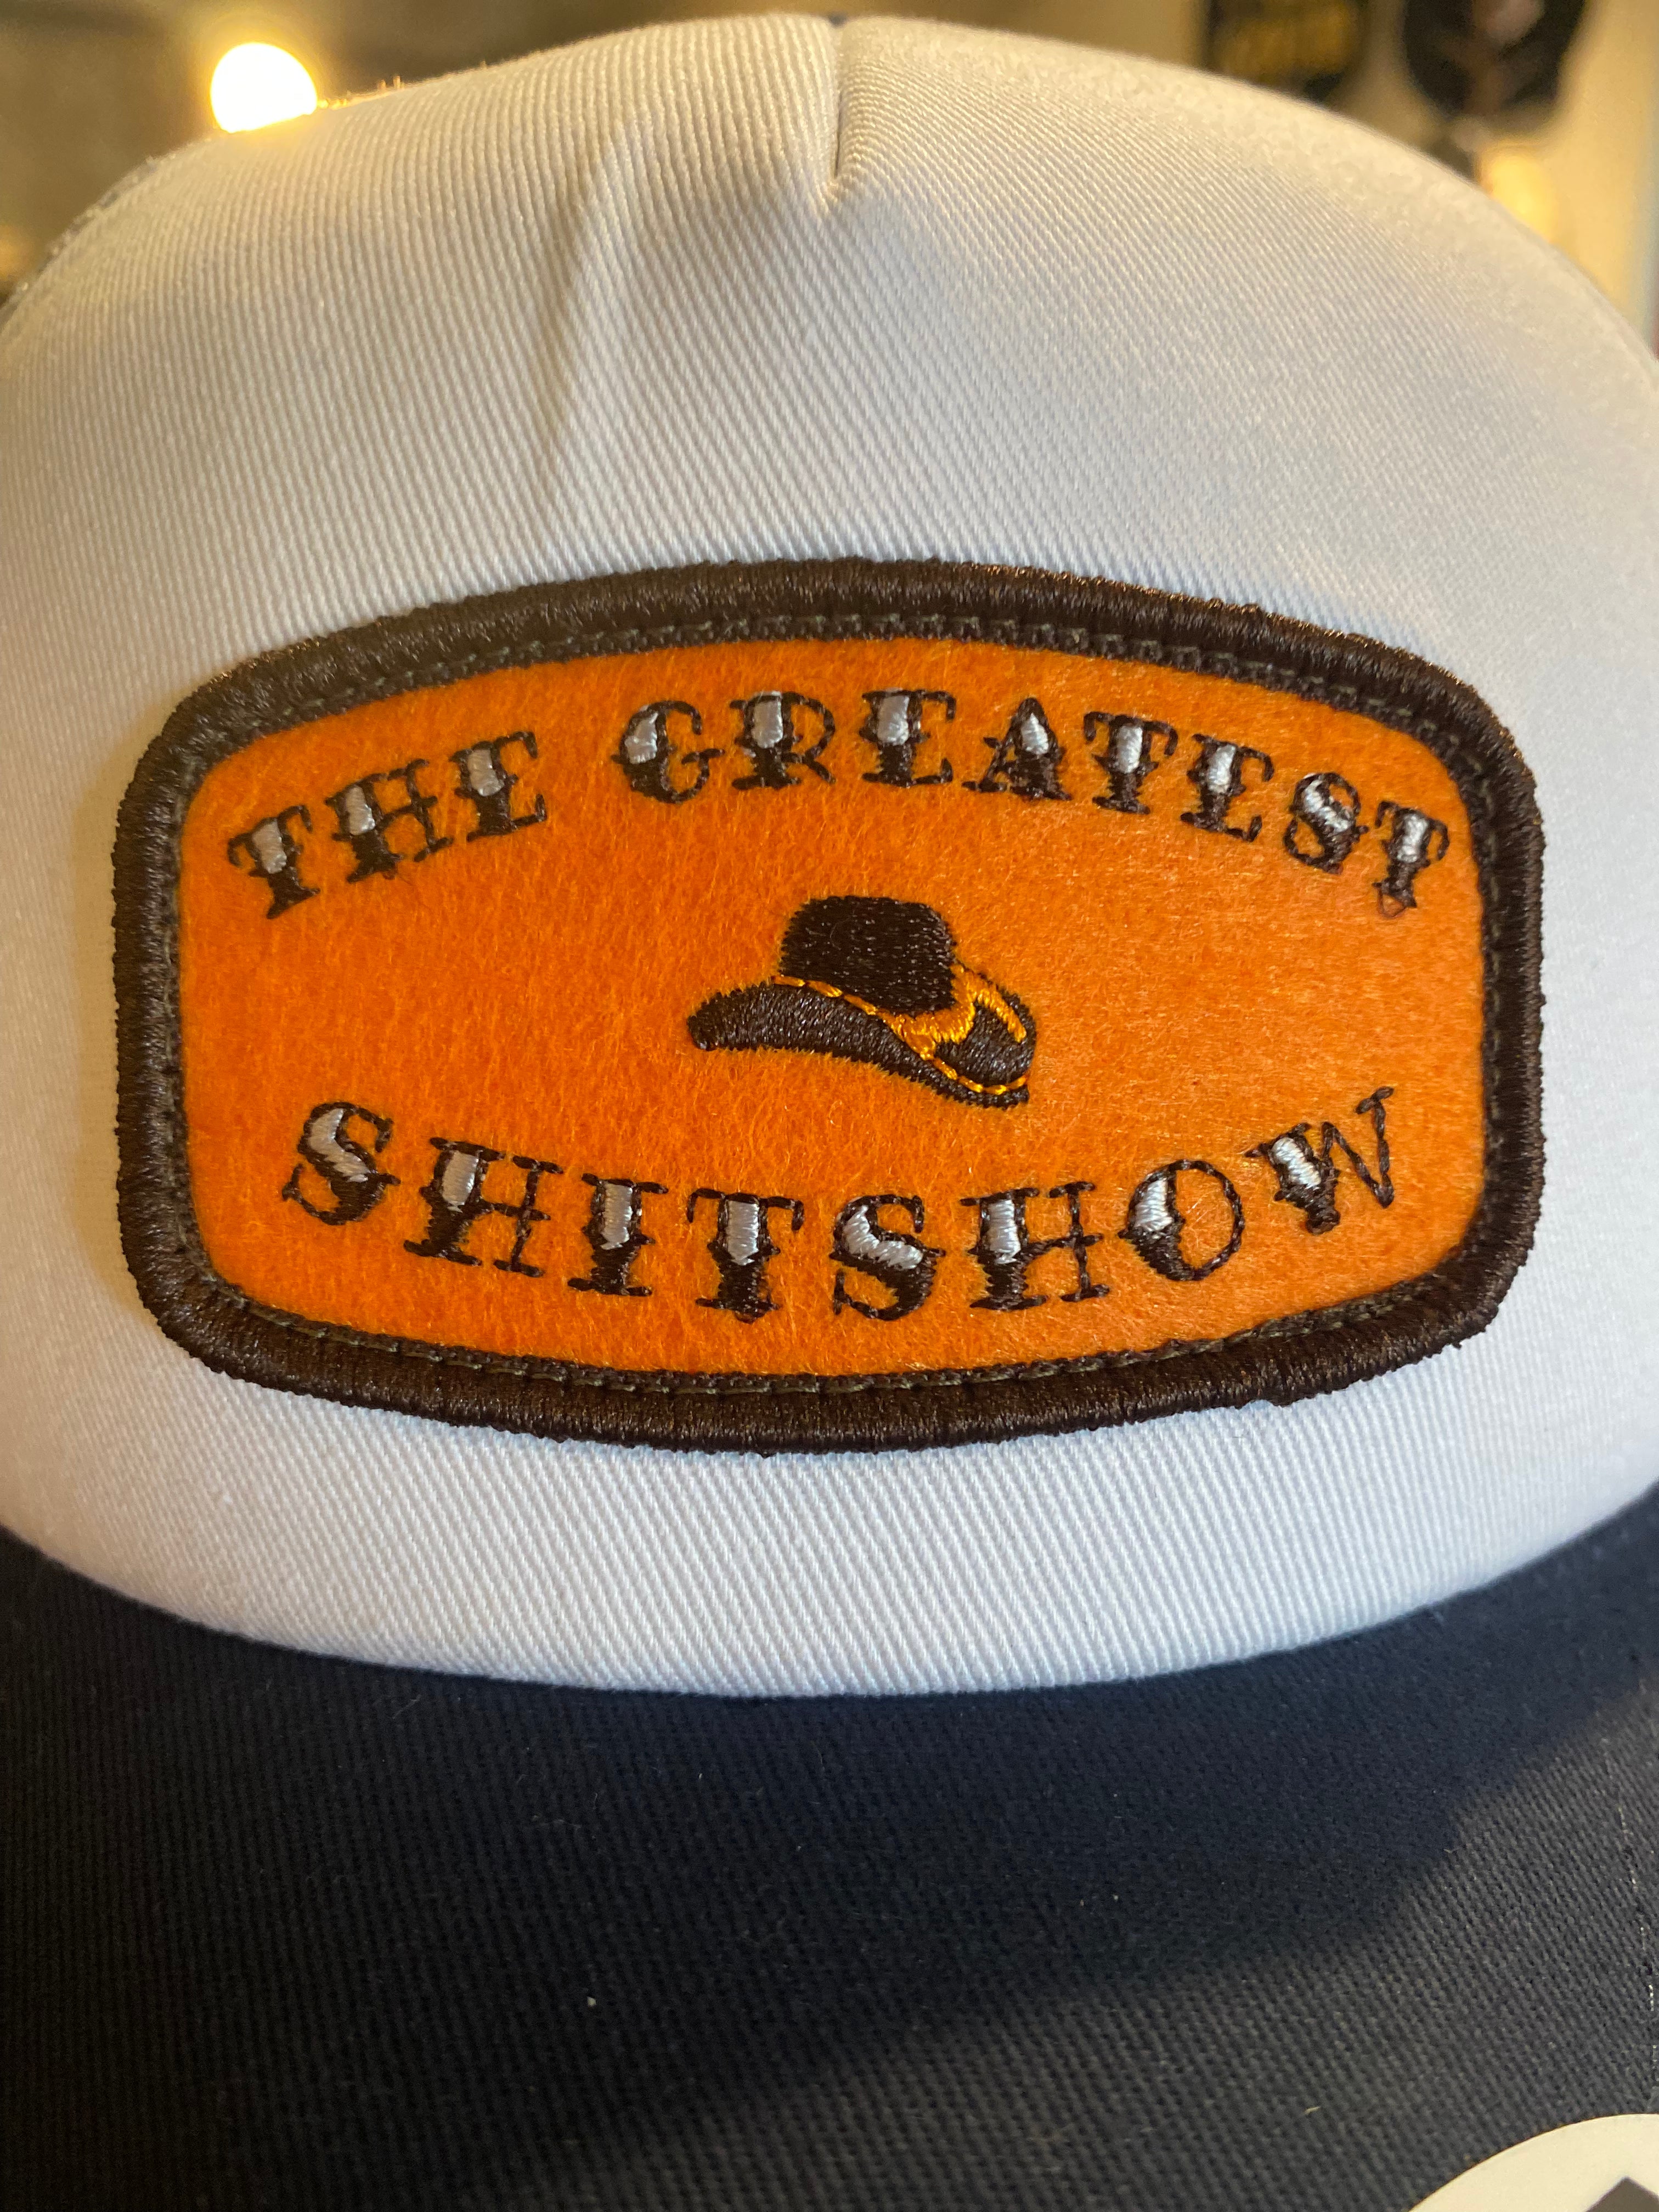 The Greatest $h!t$how - Orange Patch on White/Grey/Navy Trucker